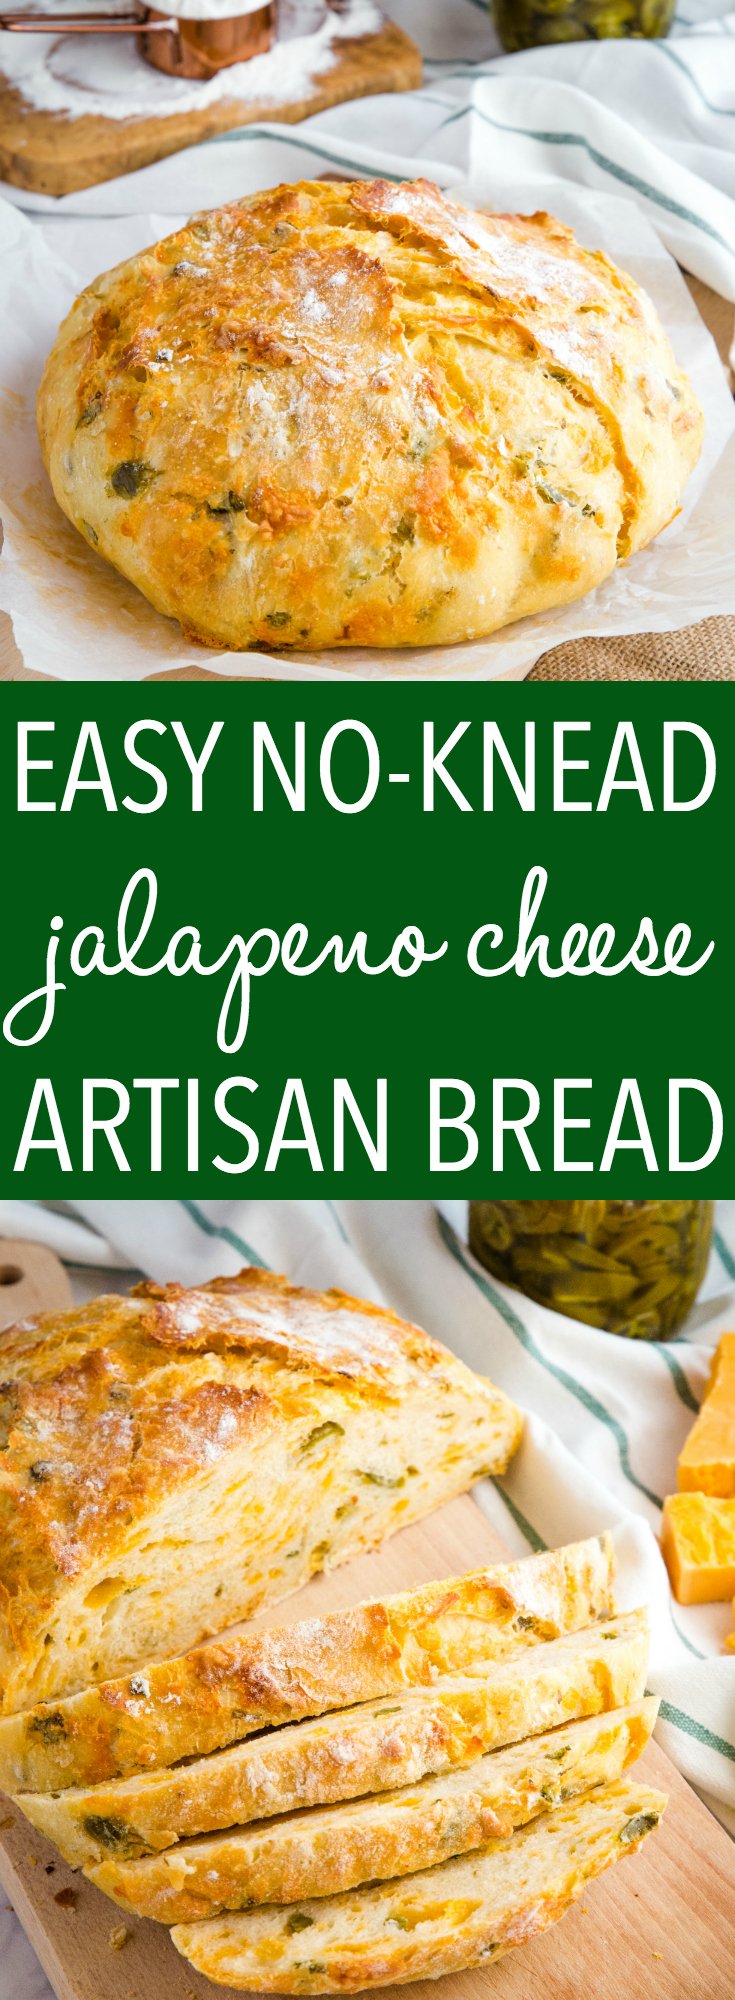 This Easy No Knead Jalapeno Cheese Artisan Bread is the BEST savoury bread for sandwiches! It's packed with spicy pickled jalapeños and real cheddar cheese! Recipe from thebusybaker.ca! #cheese #jalapeno #bread #noknead #artisan #bakery #dutchoven #easyrecipe #recipe #comfortfood via @busybakerblog